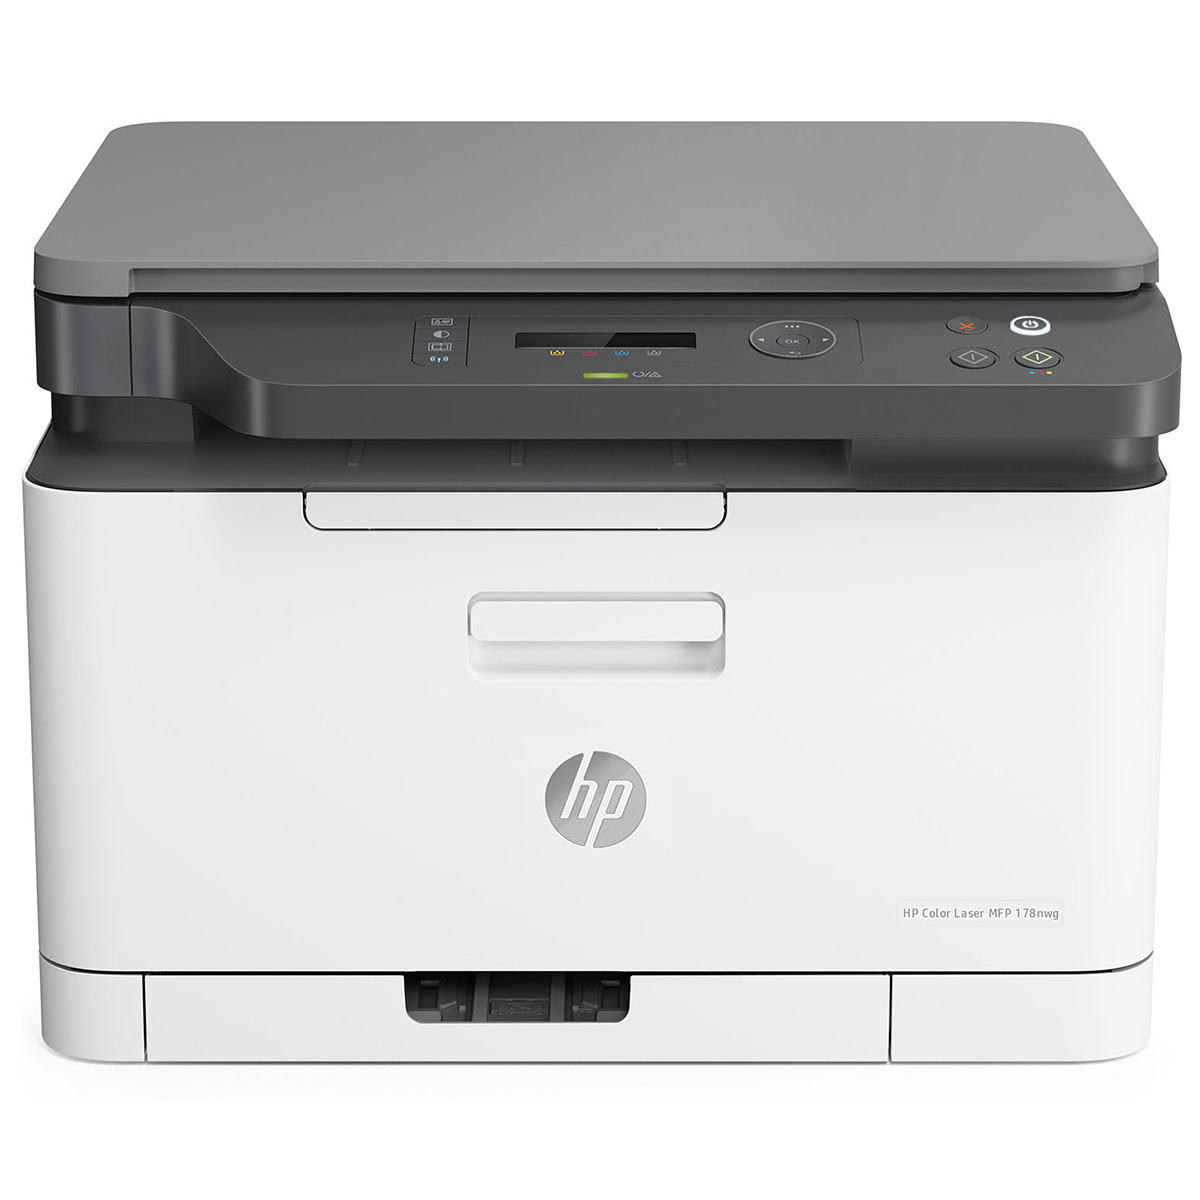 HP Color Laser 178nw All-in-One Printer - Computers